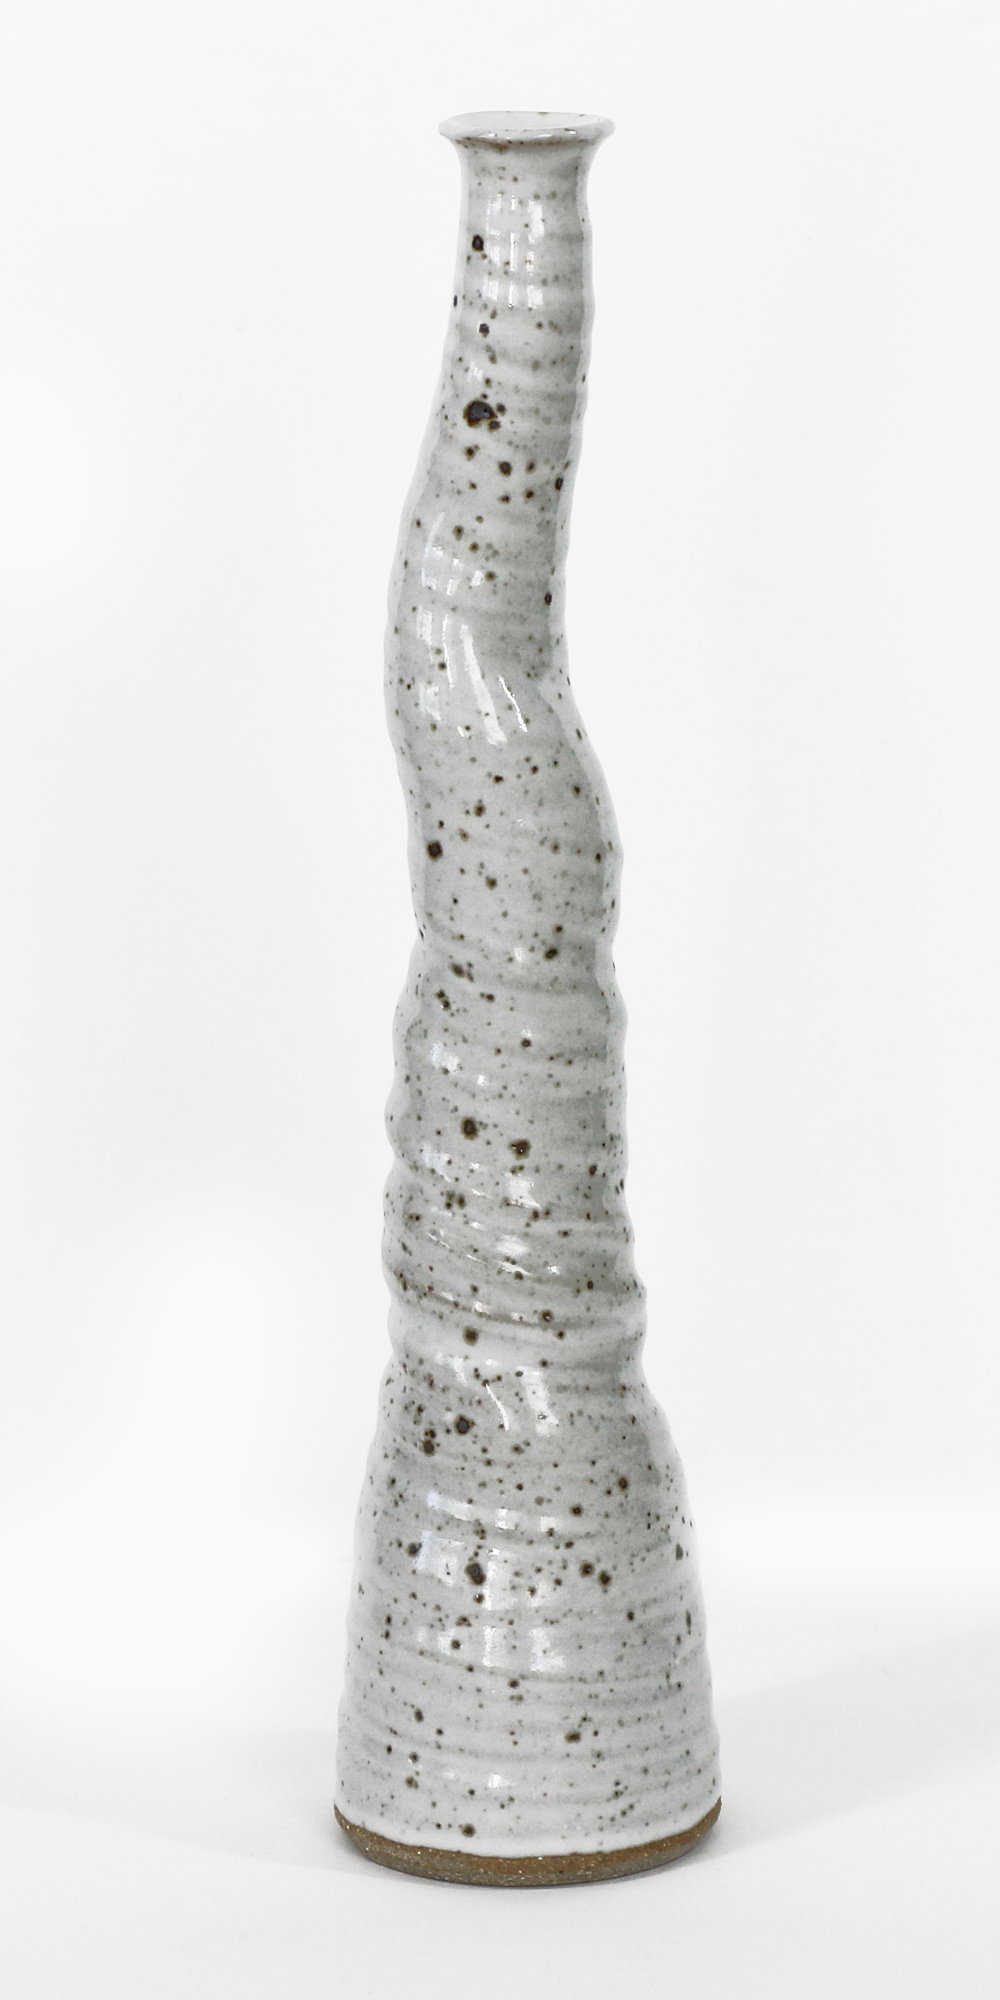 Happiness Vase #1 Ceramic Jacqueline Kampen The Happiness Project